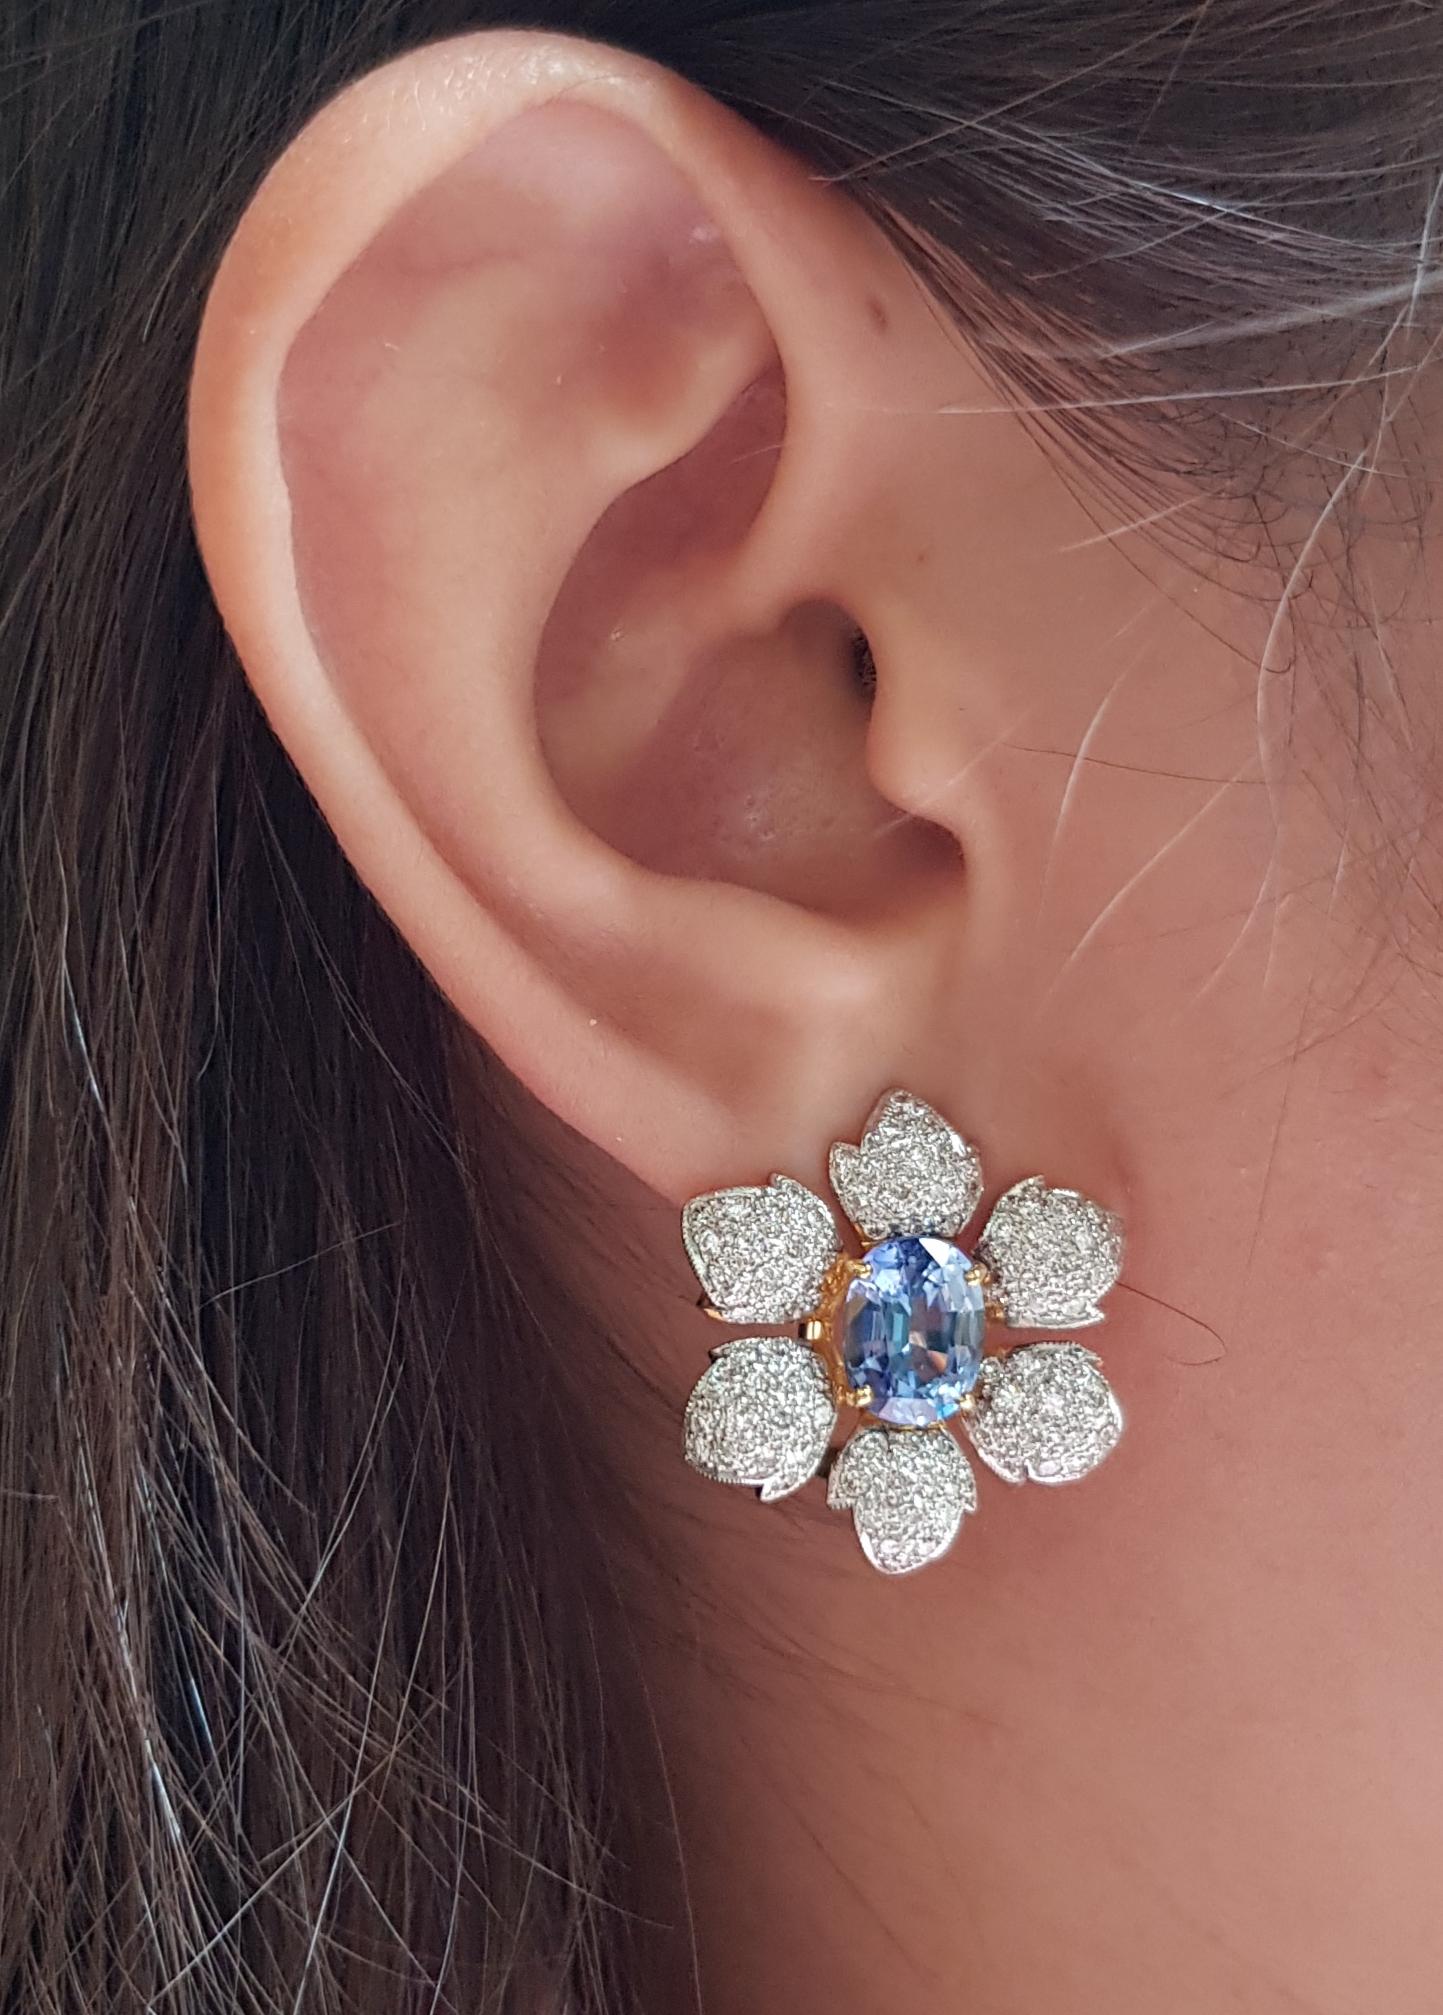 Blue Sapphire 4.79 carats with Diamond 2.03 carats Earrings set in 18 Karat Gold Settings

Width:  2.2 cm 
Length: 2.4 cm
Total Weight: 12.35 grams

